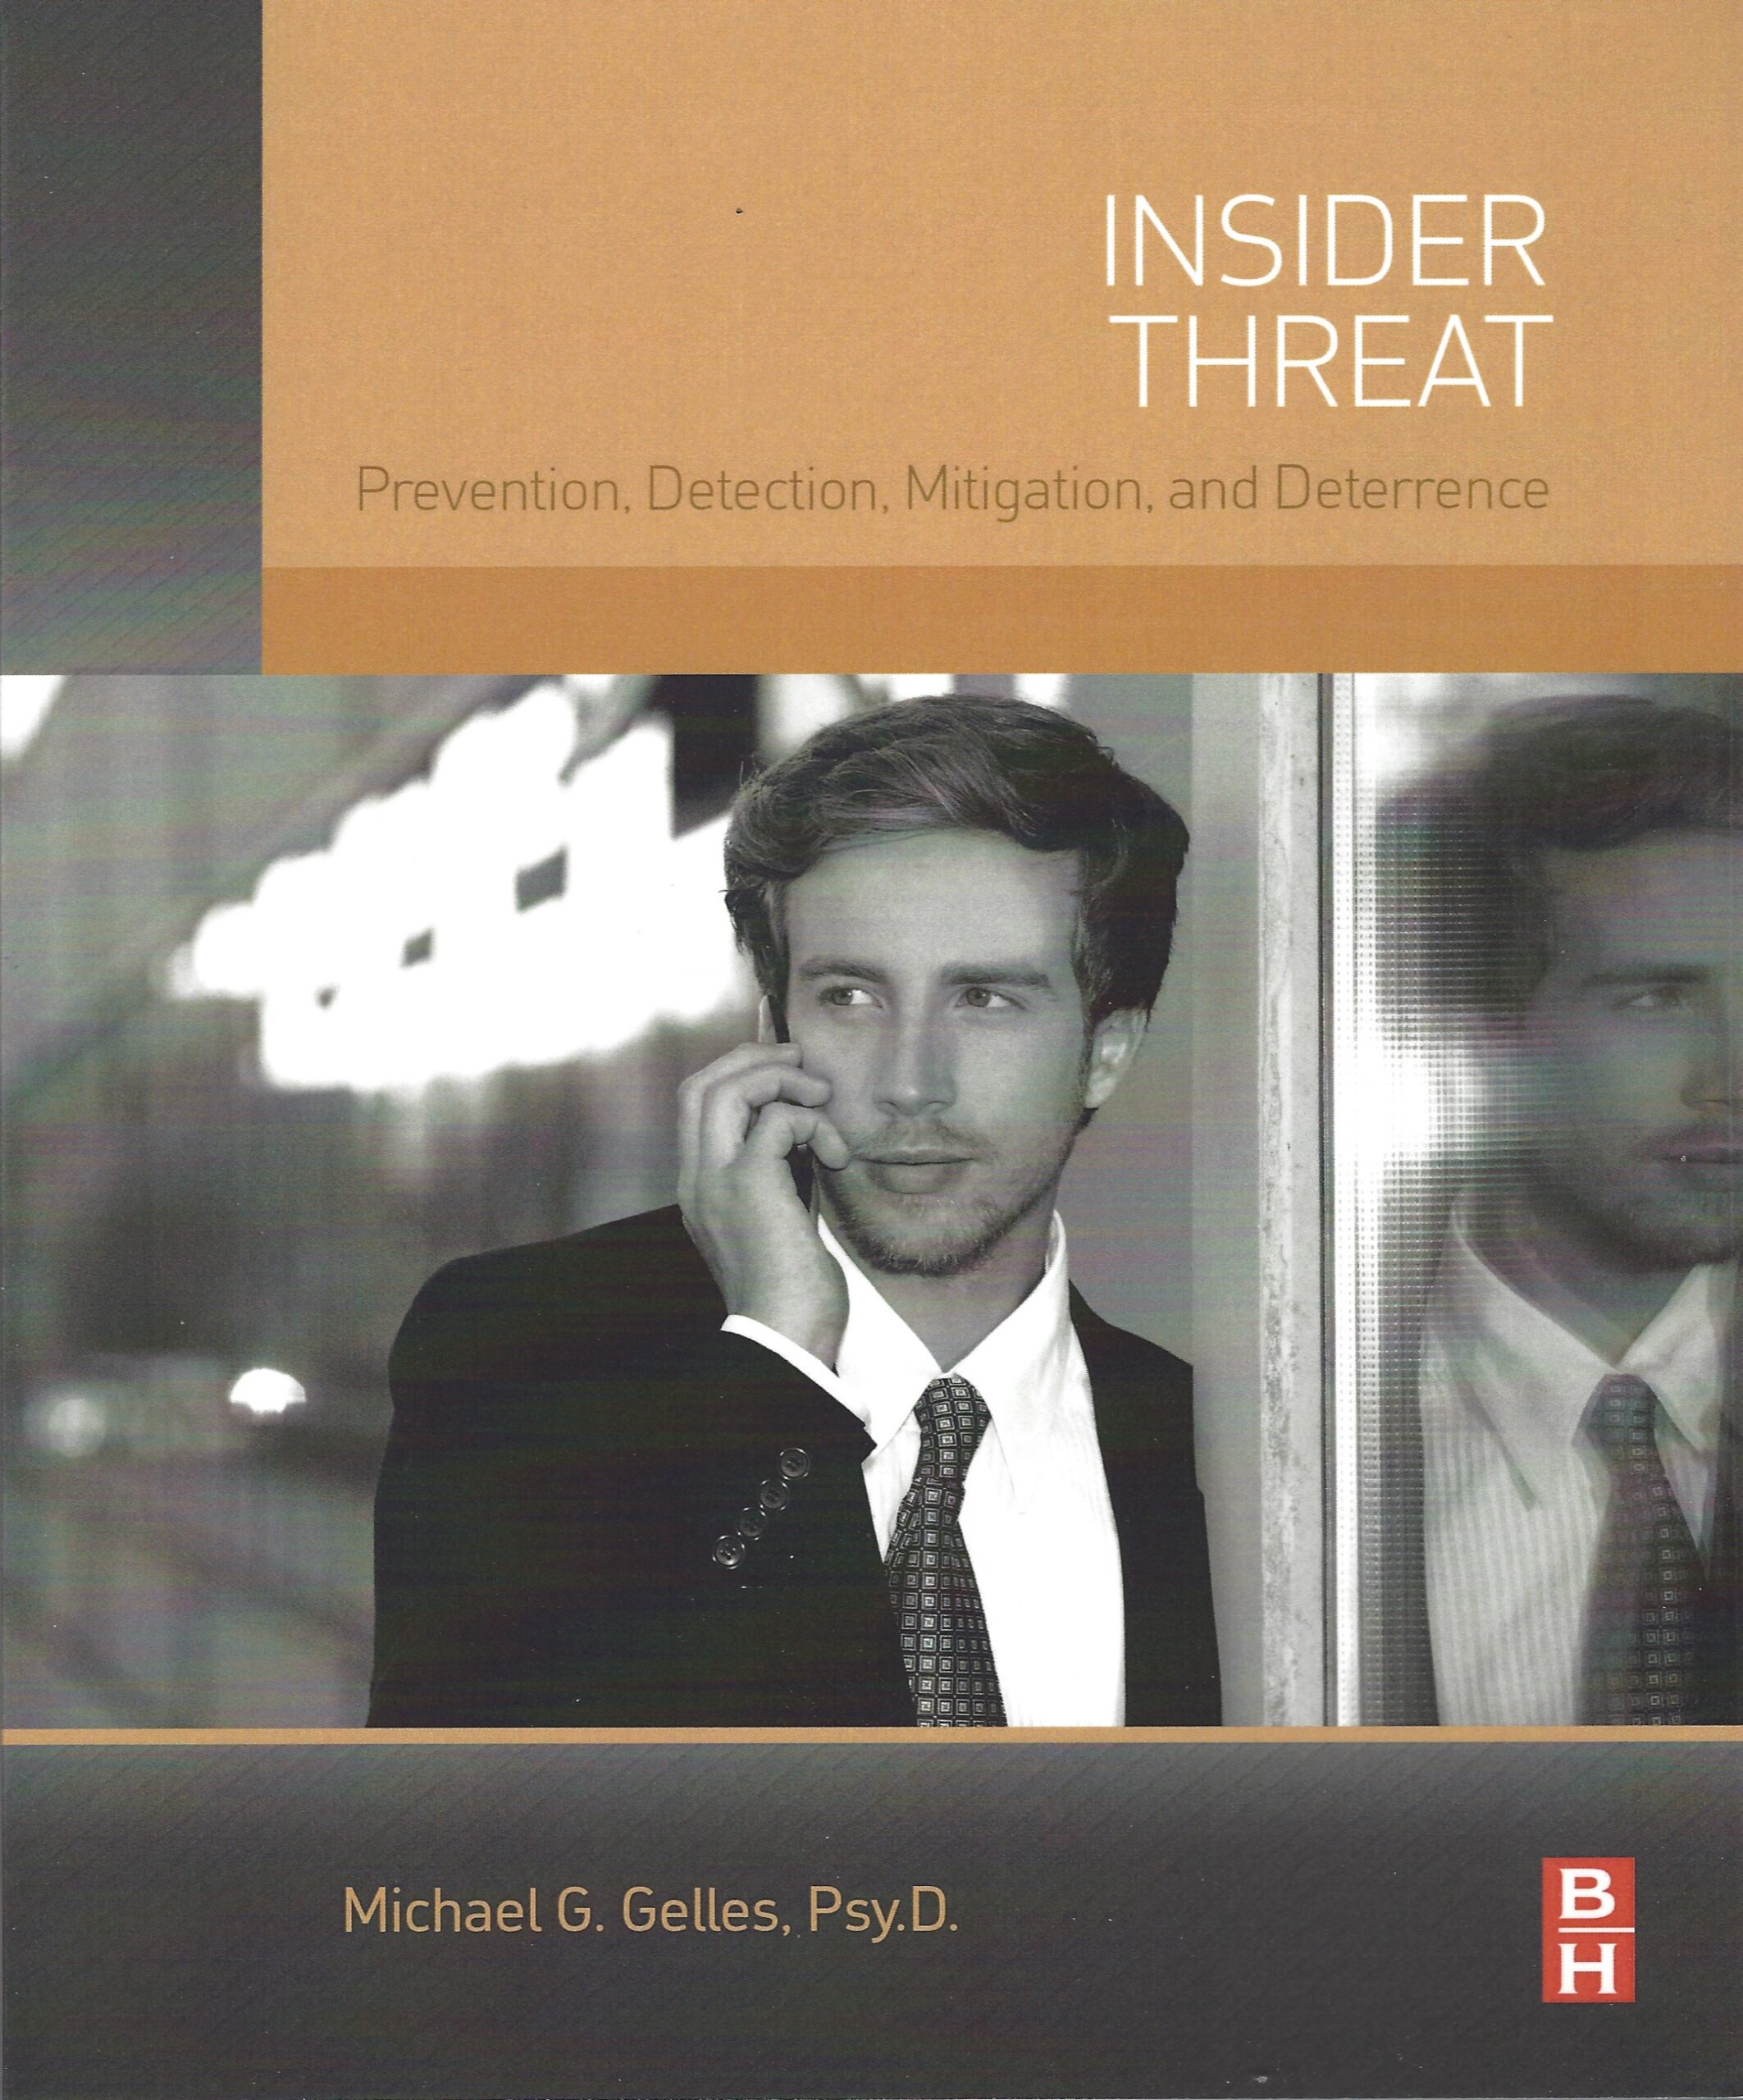 Insider Threat: Prevention, Detection, Mitigation and Deterrence